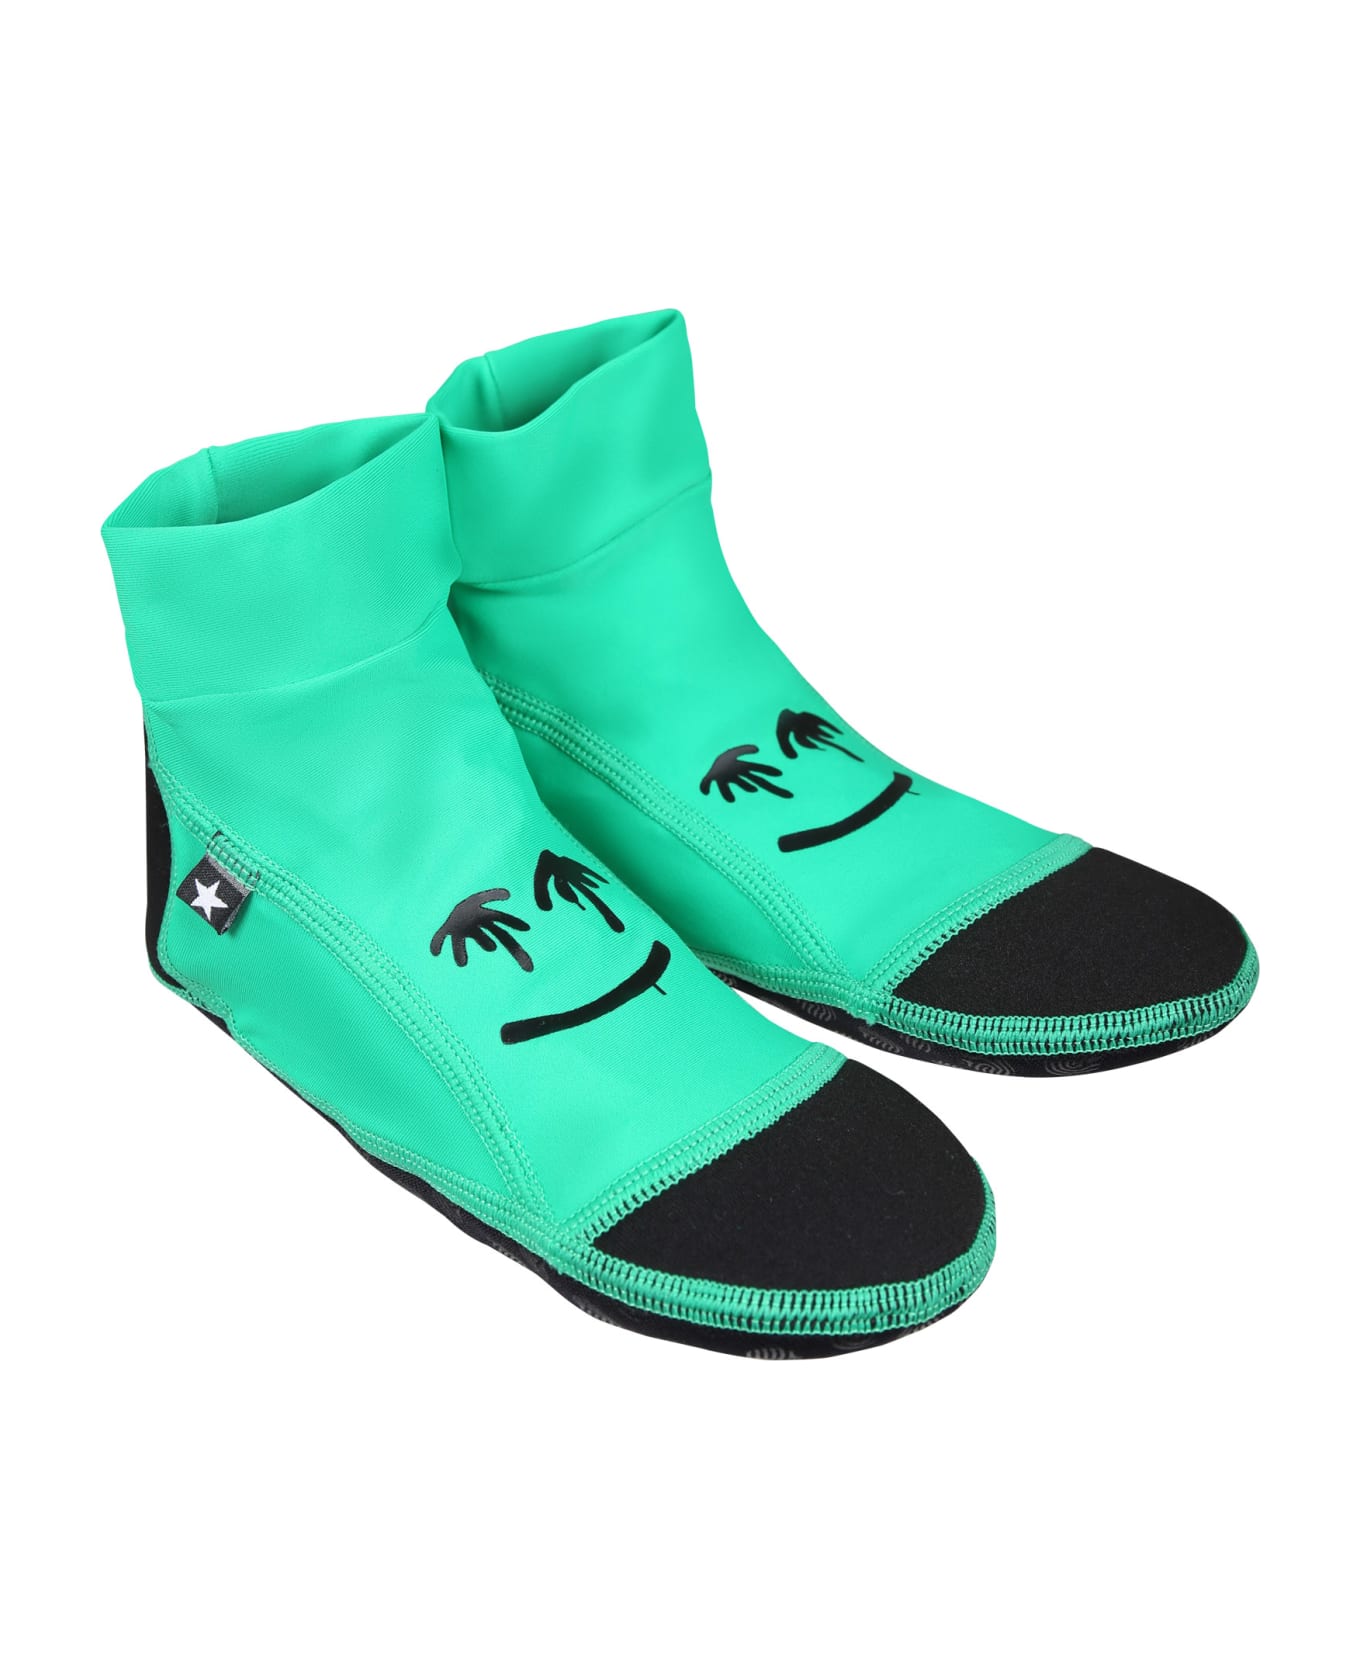 Molo Green Socks For Kids With Smiley - Green シューズ